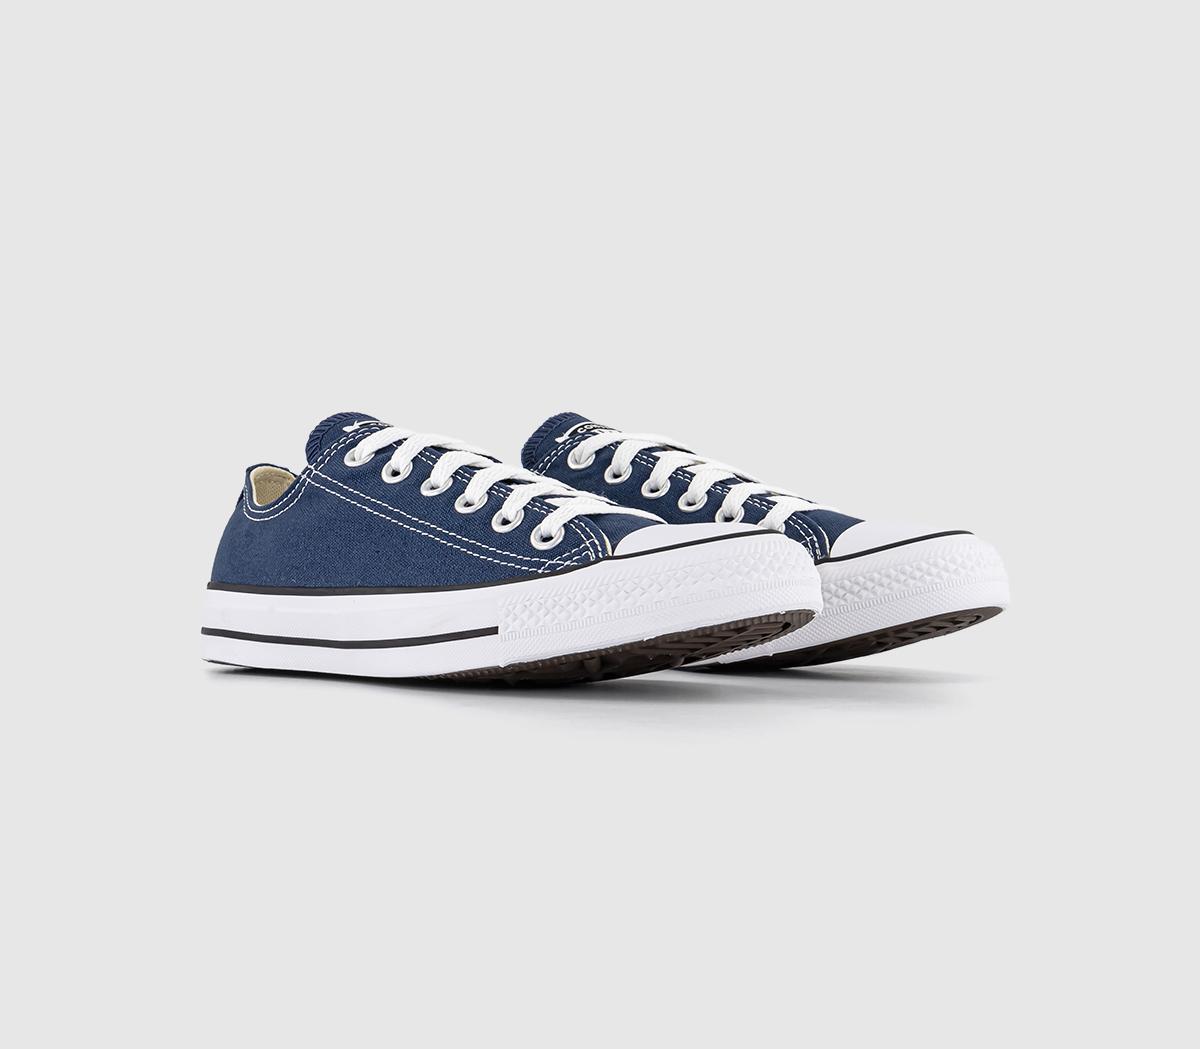 Mens Converse All Star Low Navy Canvas Trainers, 4.5